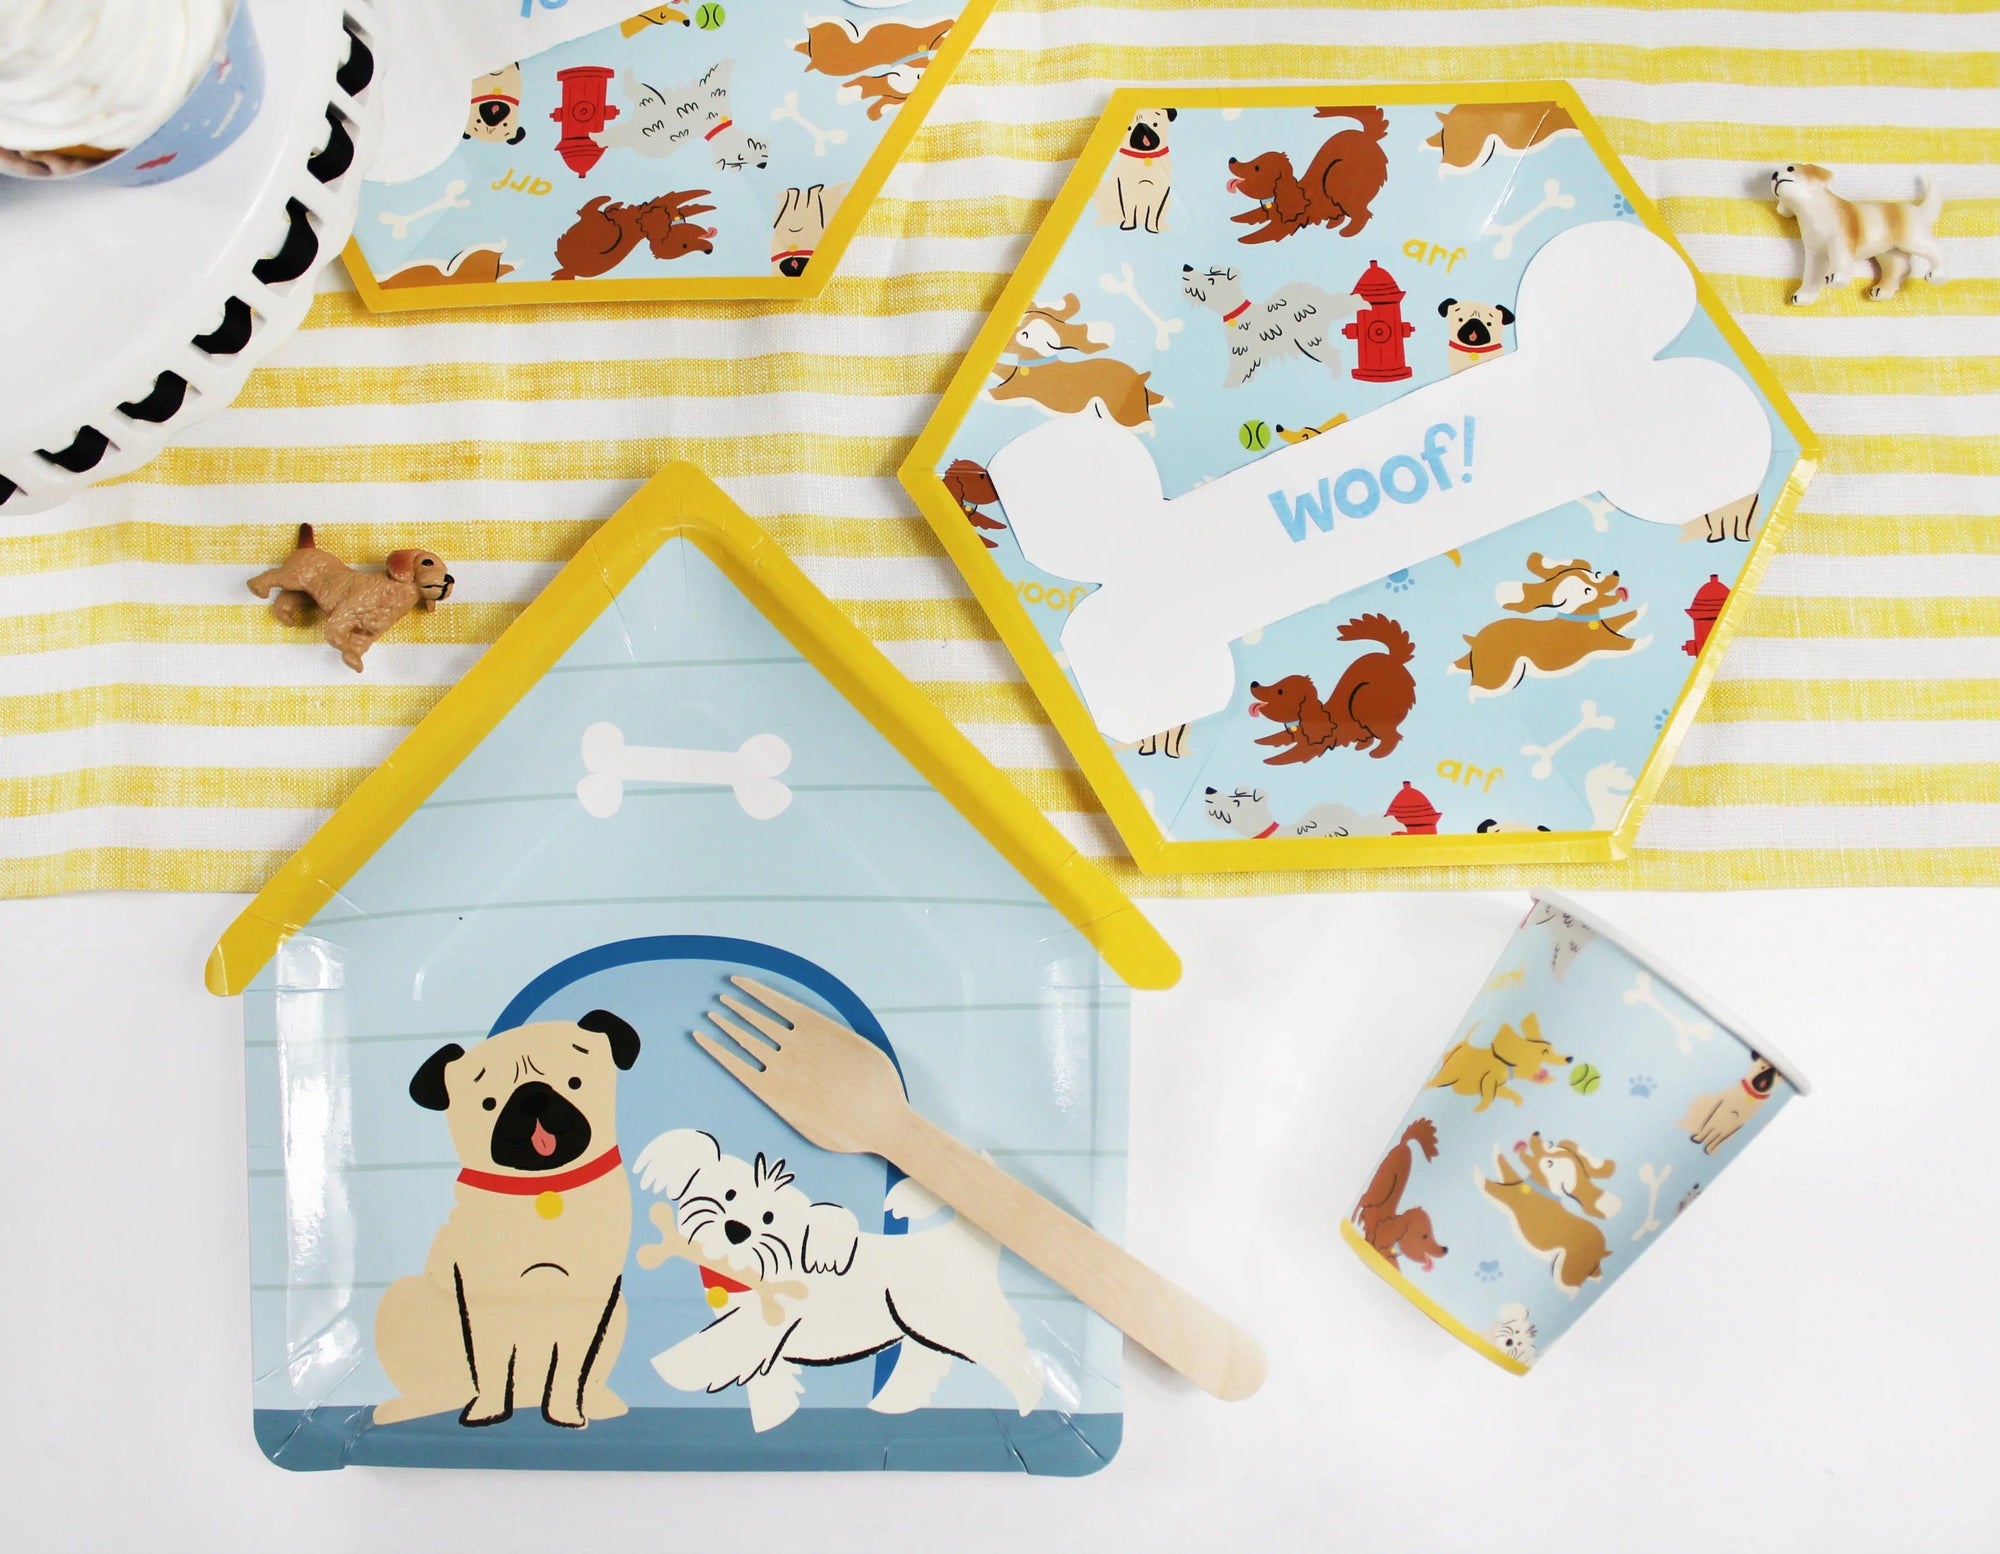 Puppy Doghouse Plates